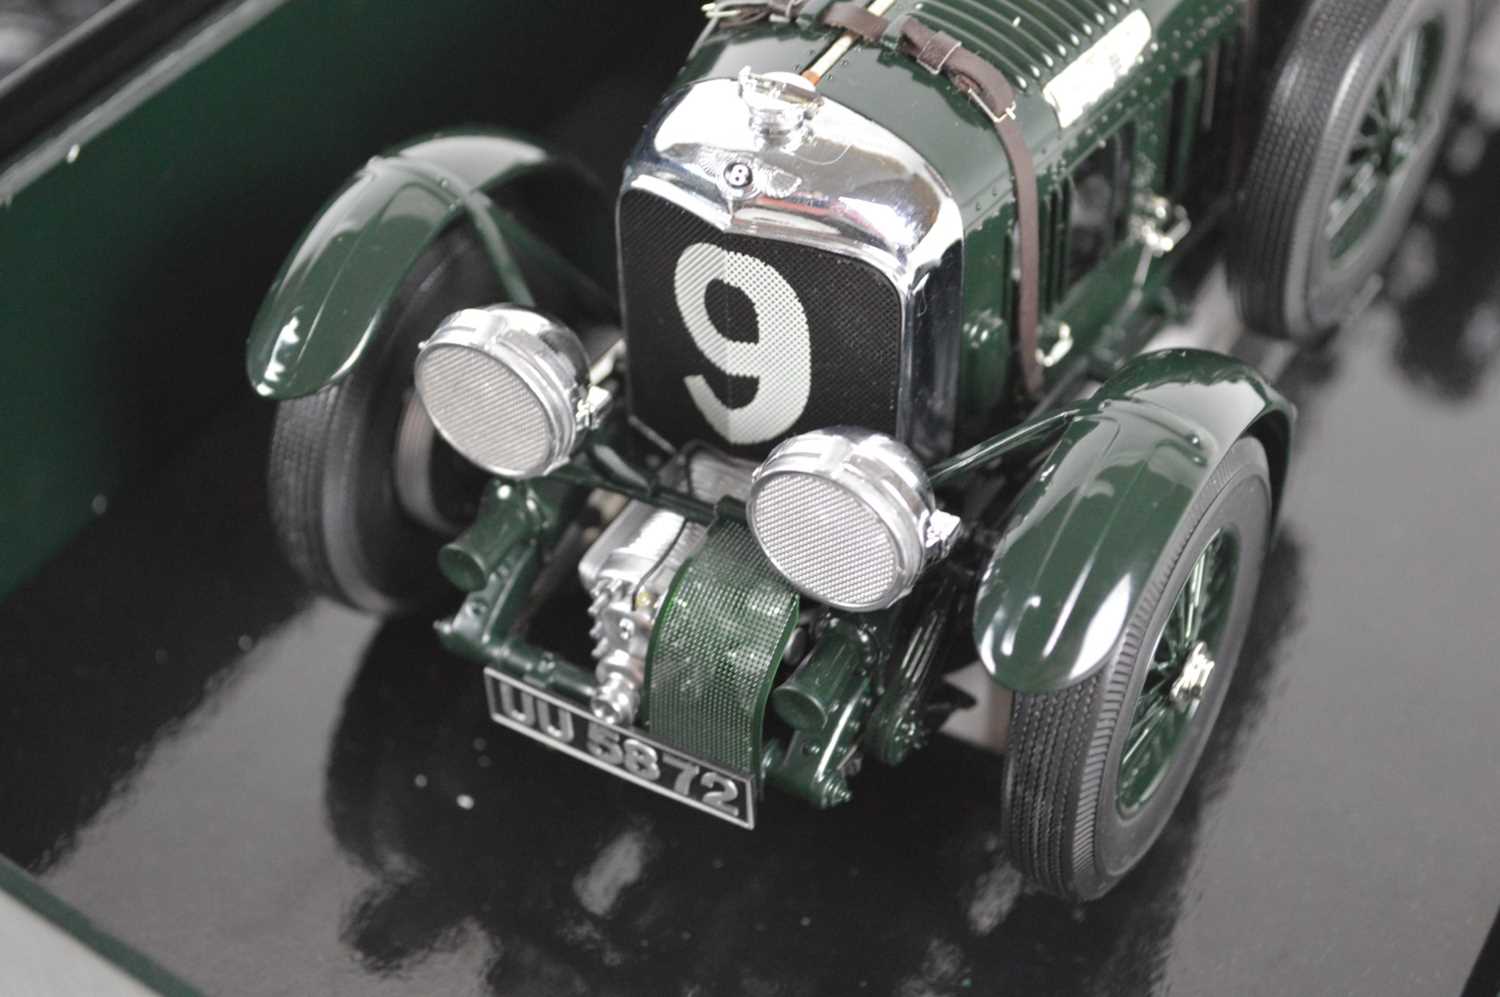 Minichamps 1:18 scale model of a Bentley 4.5ltr (4 1/2) Blower racing car - Image 2 of 4